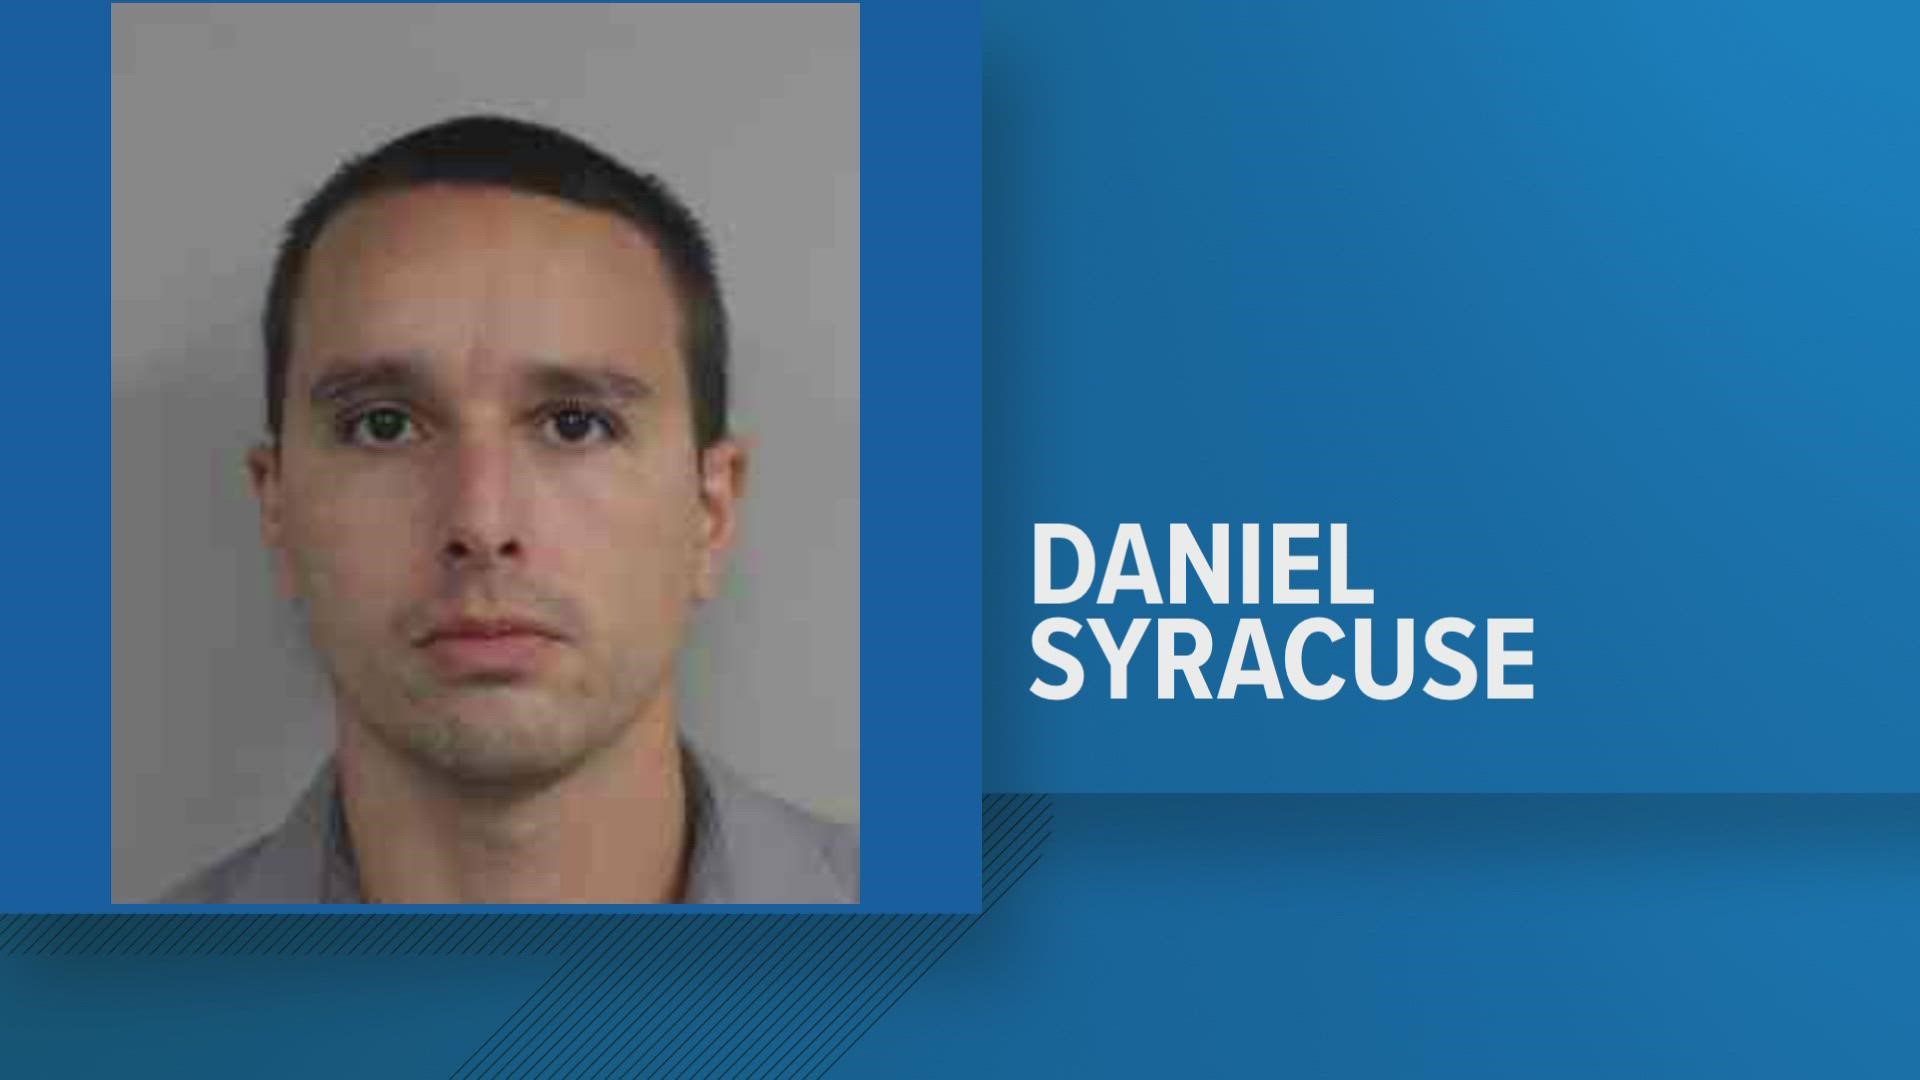 39-year-old Daniel Syracuse got 364 days in jail today... from Erie County Court Judge Susan Eagan... after pleading guilty to child endangerment.